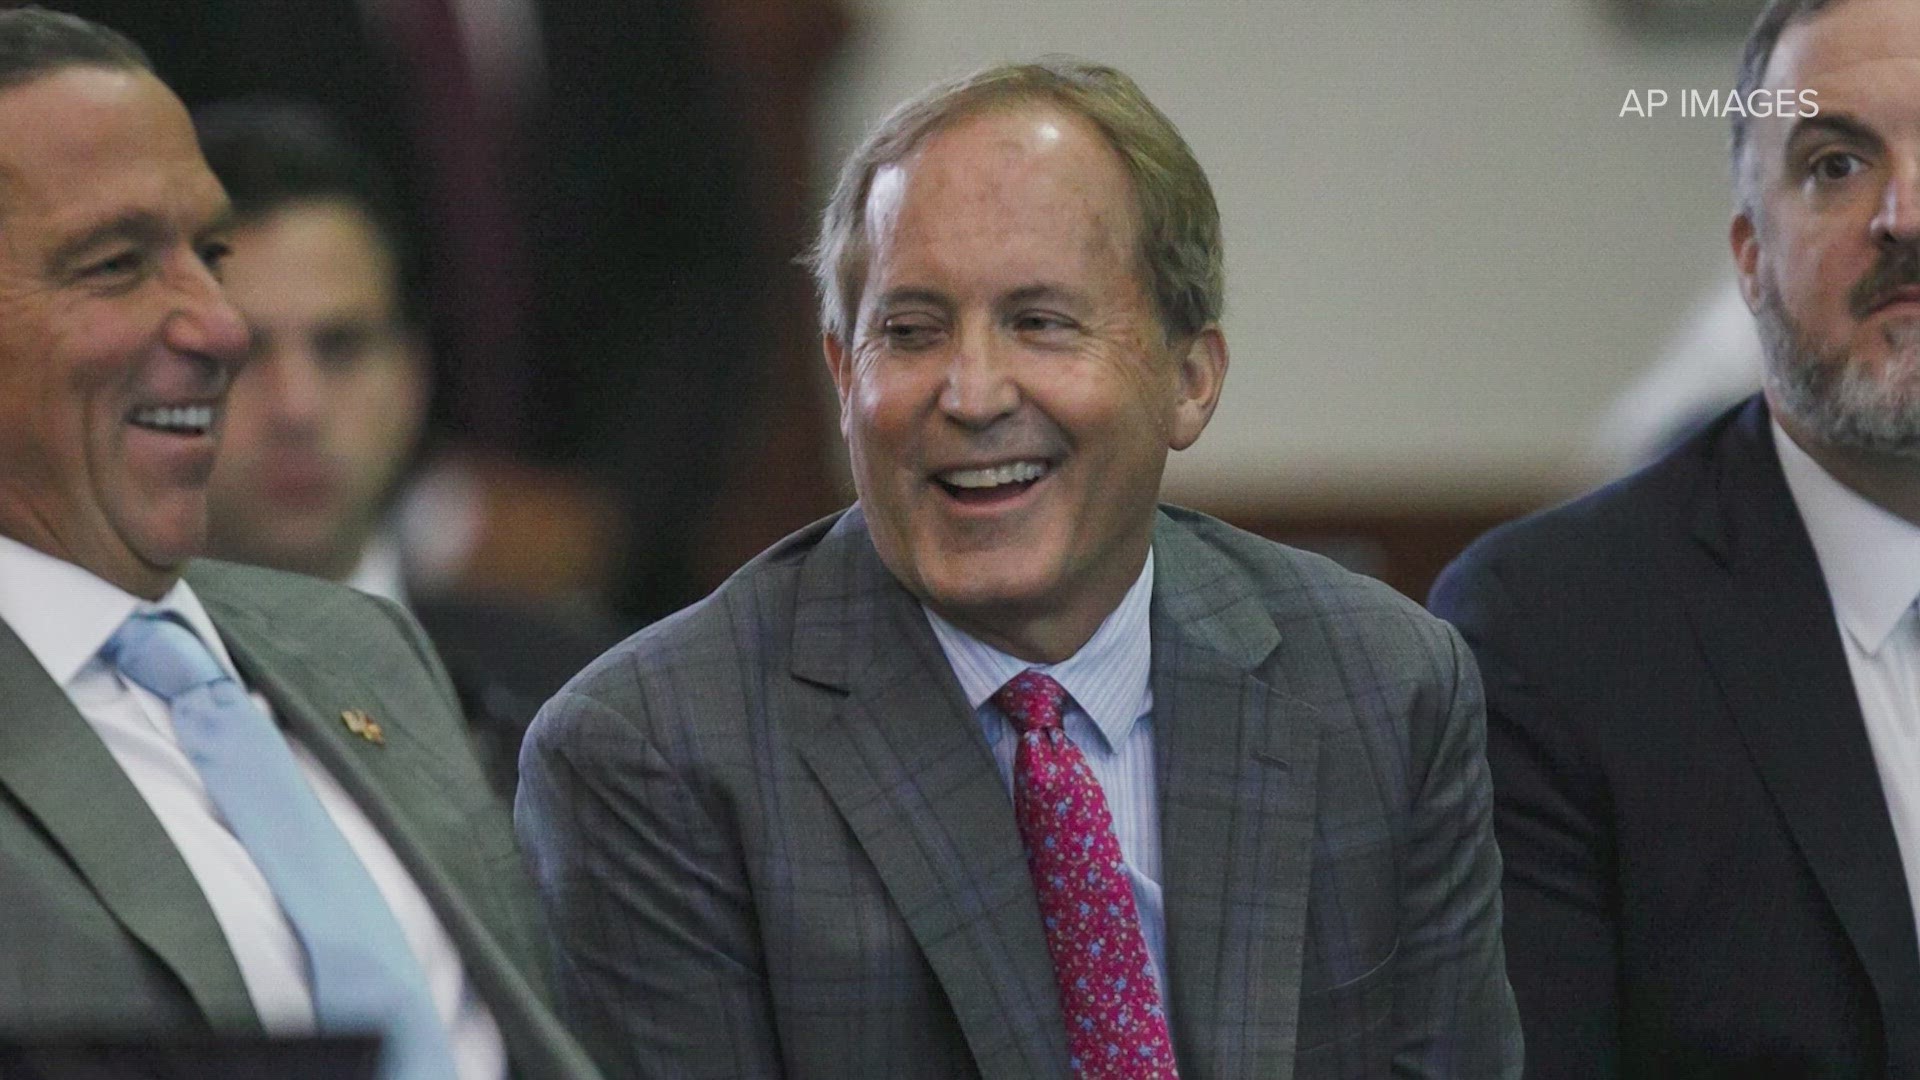 The two Republicans said they plan to continue their efforts to hold Paxton accountable for what they say was the systemic abuse of his office.